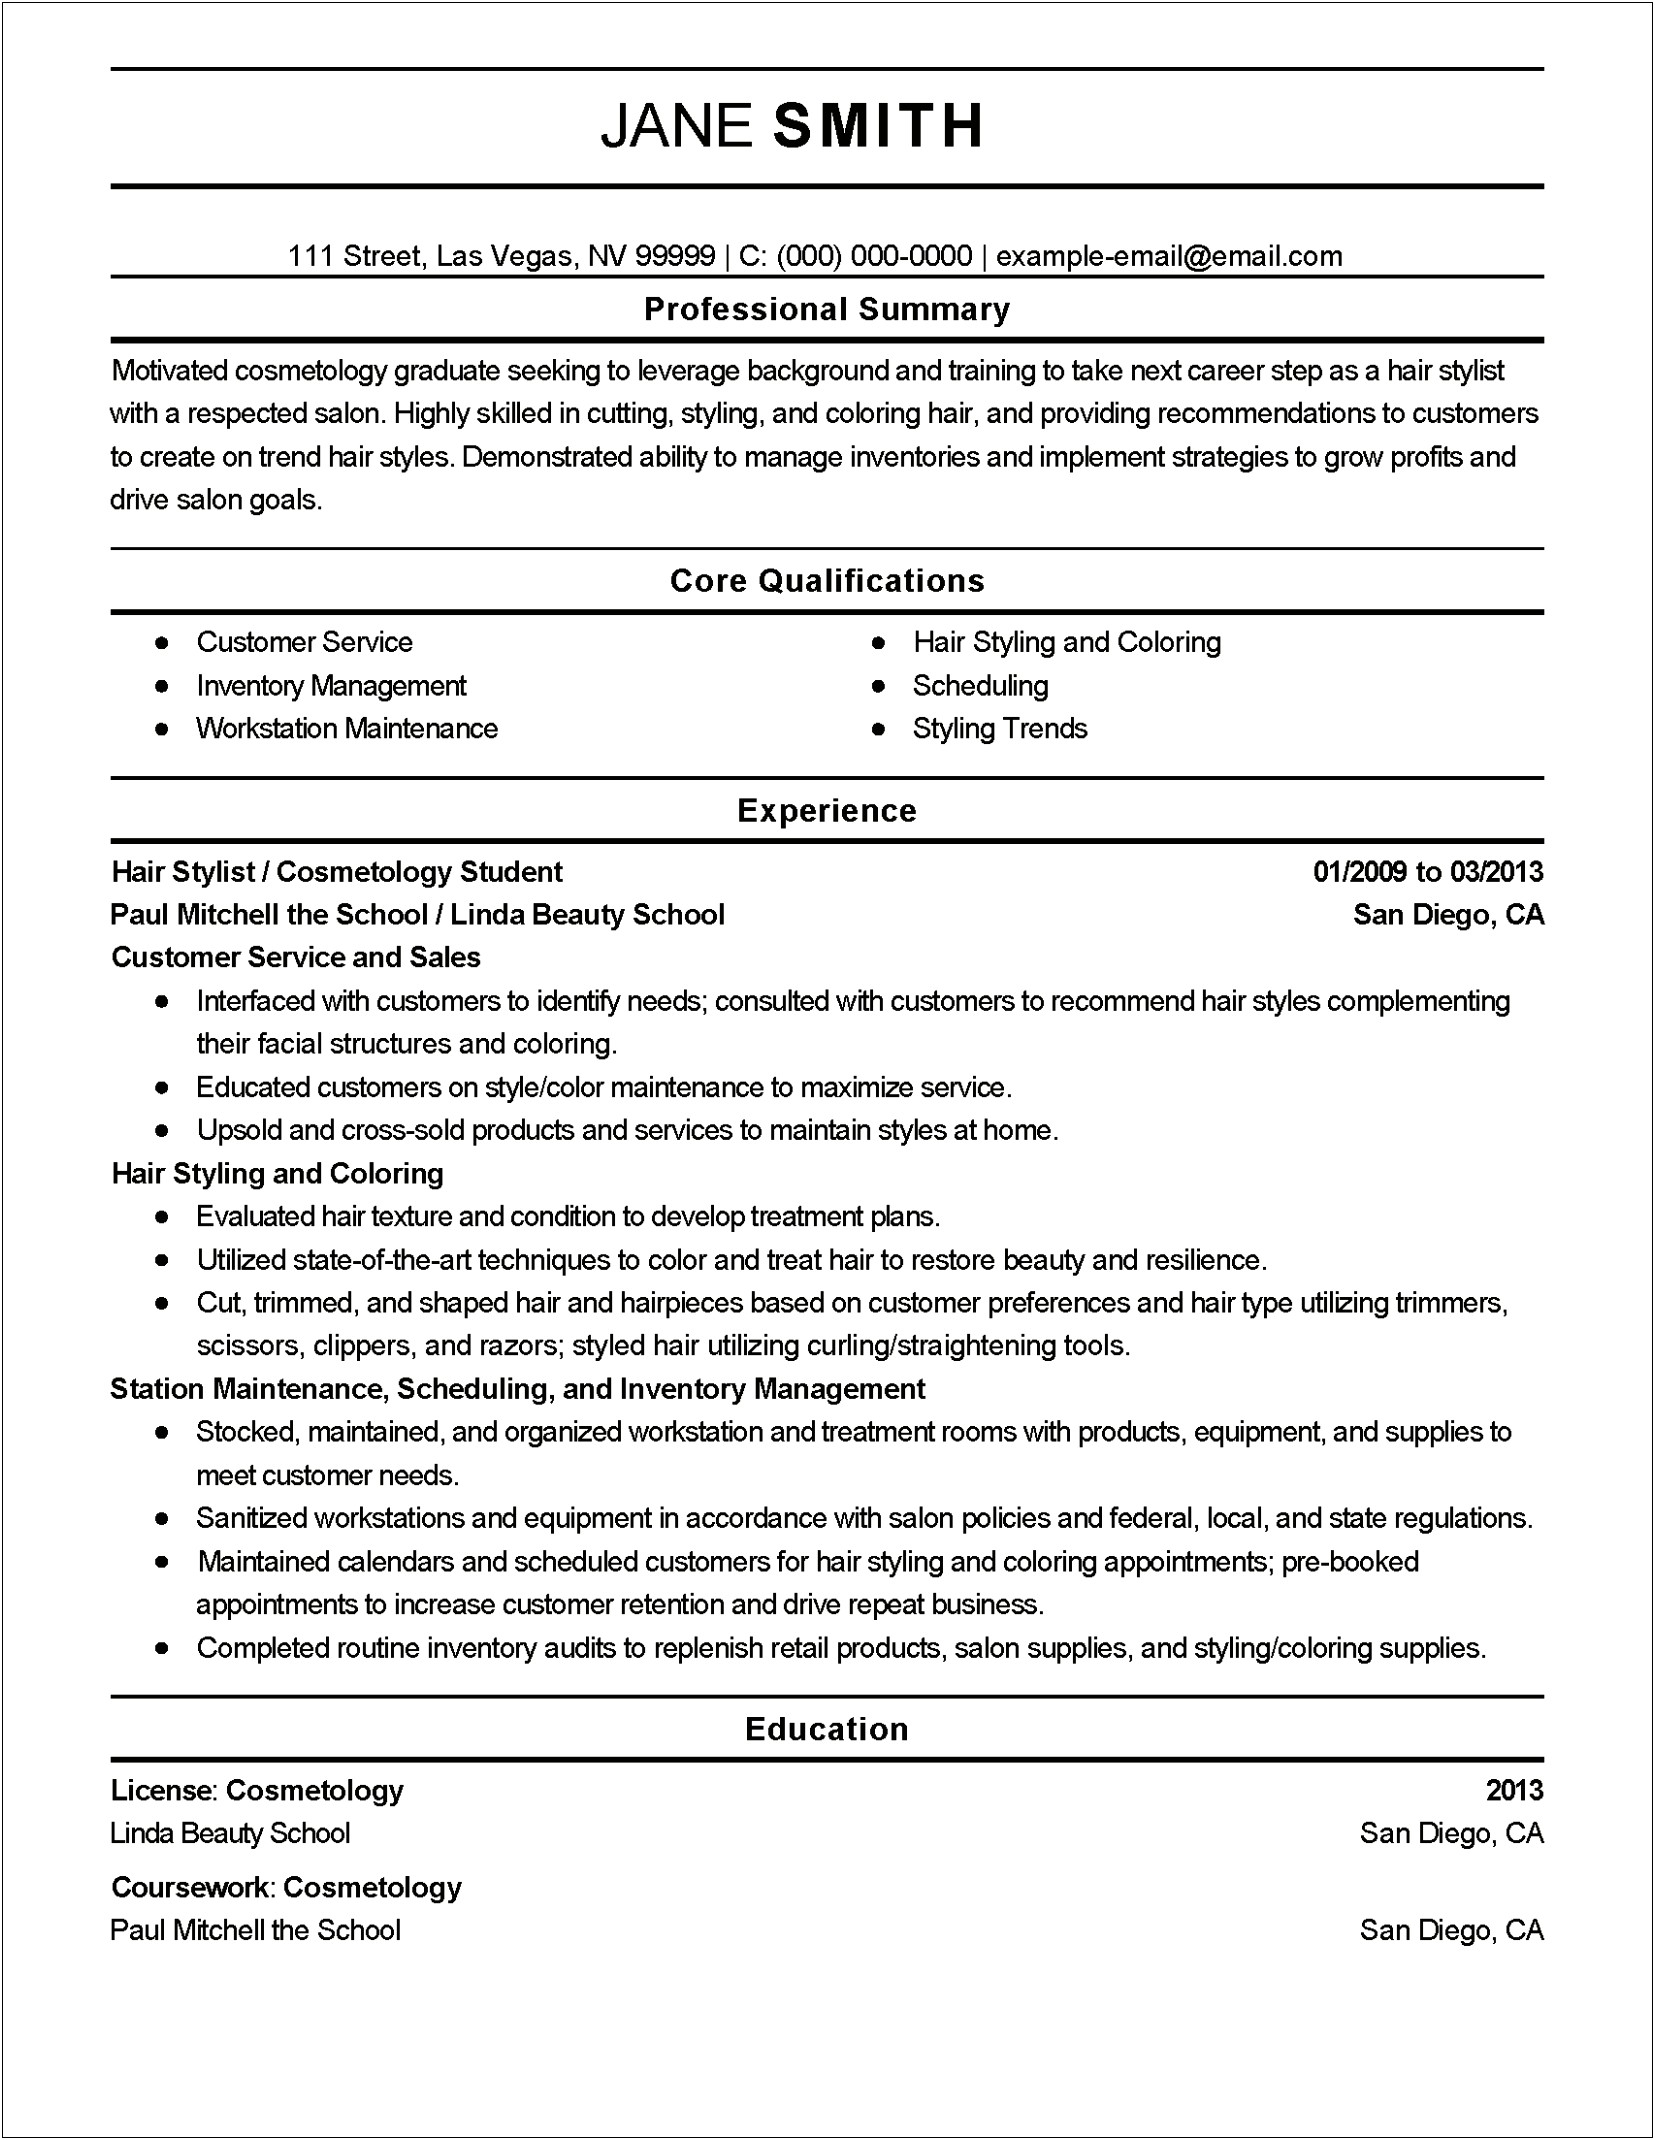 Resume Summary Examples For Graduate Students